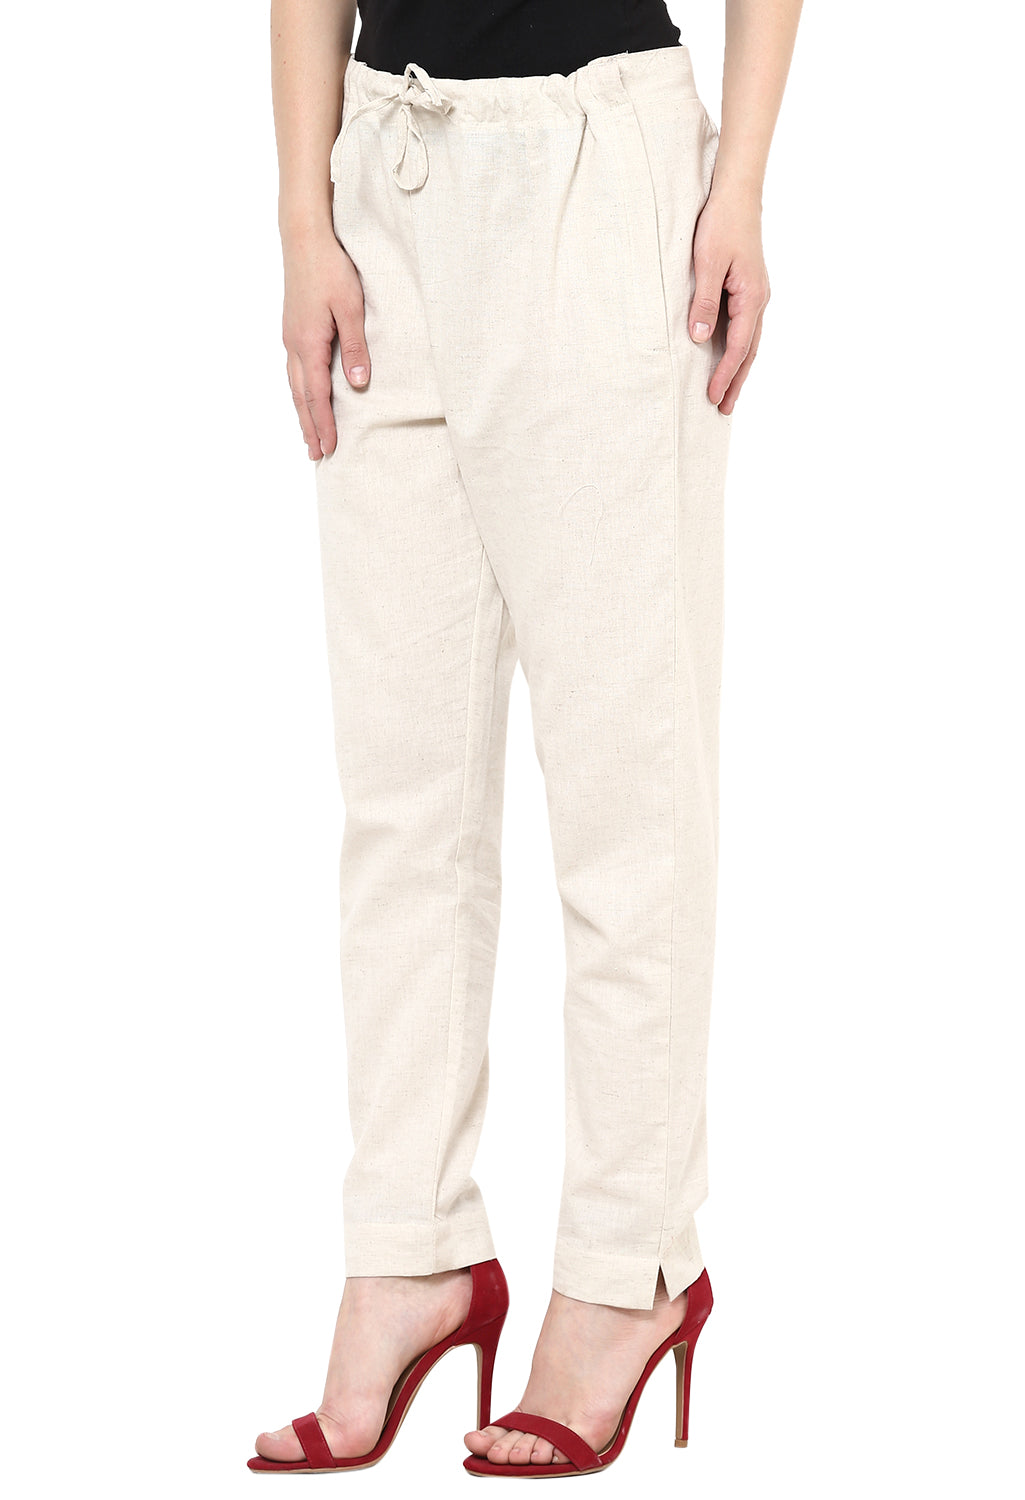 Off-white cotton pants for ladies